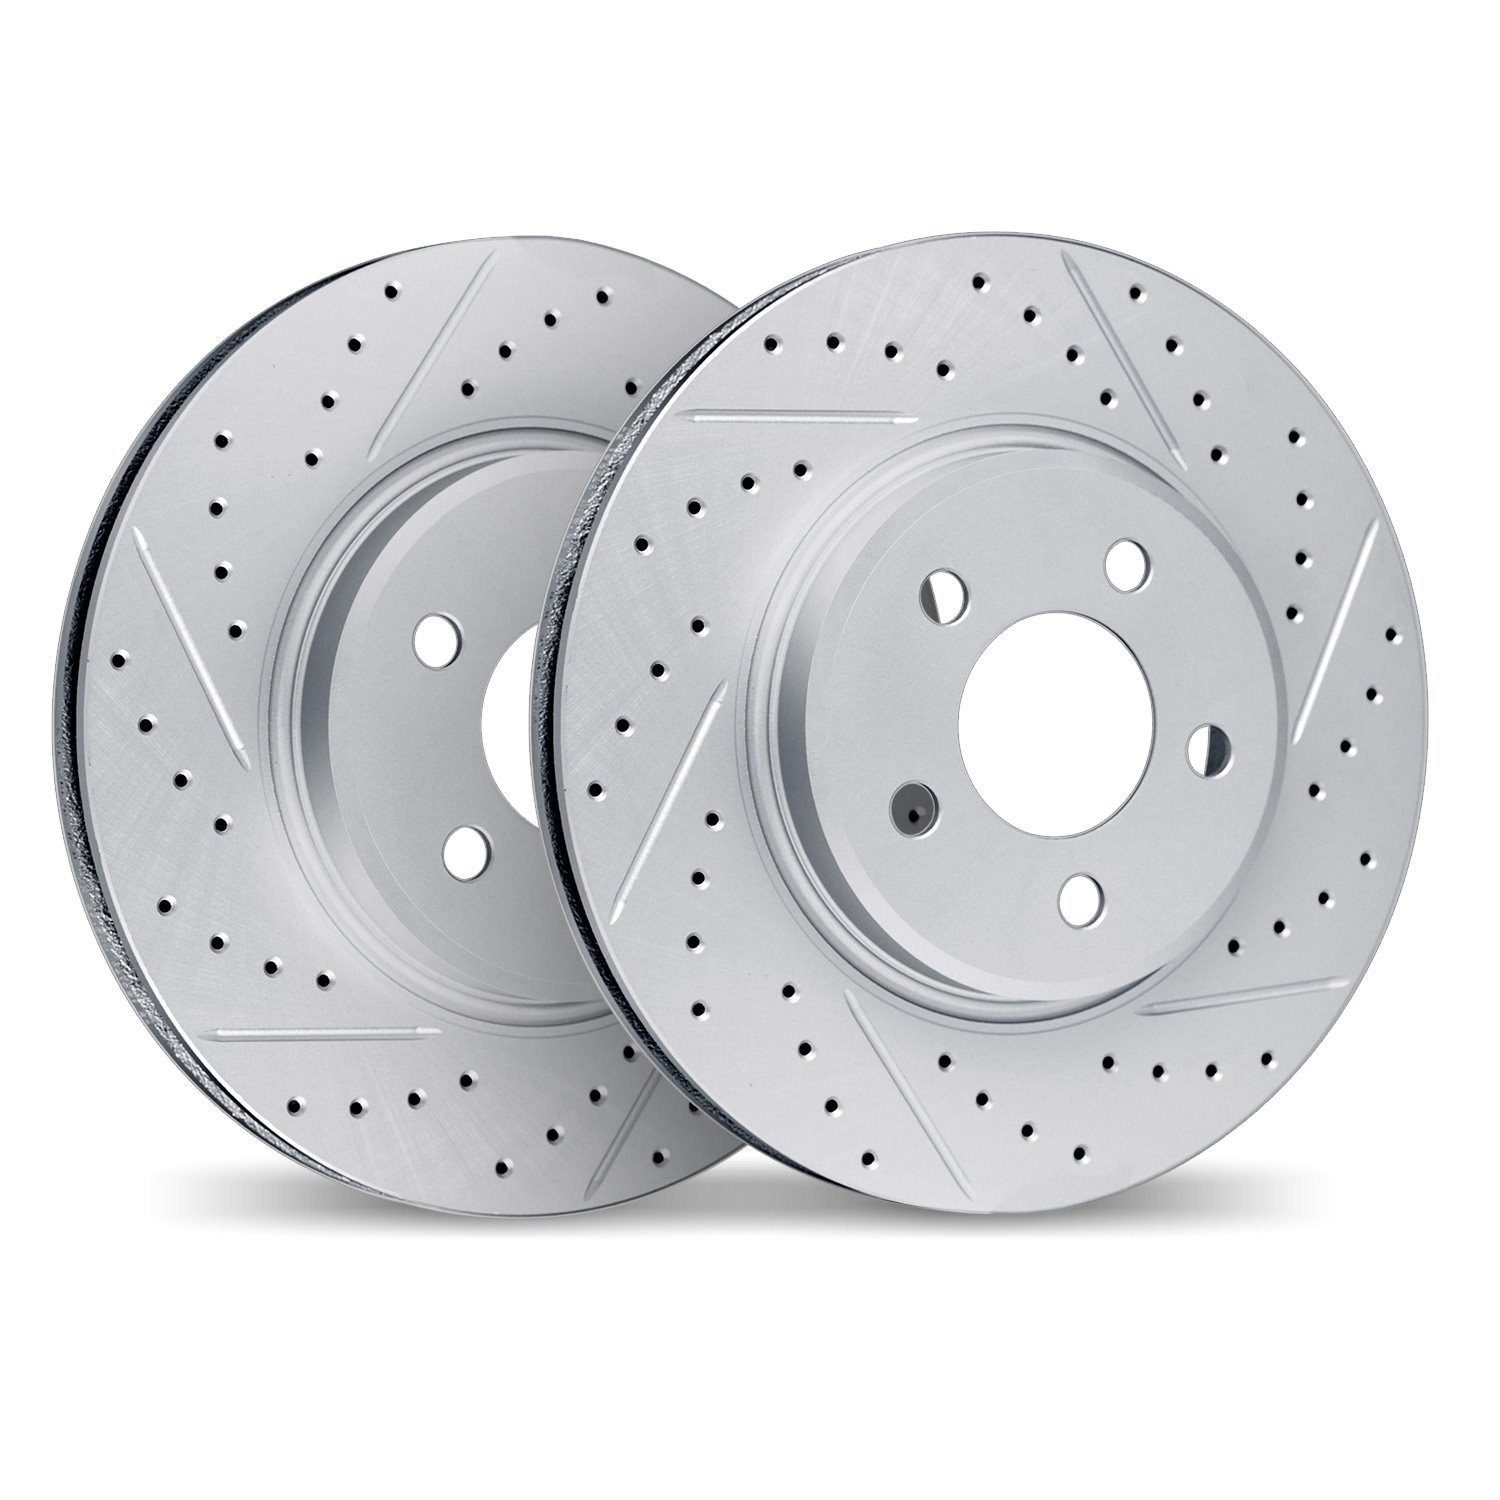 2002-31084 Geoperformance Drilled/Slotted Brake Rotors, 1995-2003 BMW, Position: Rear